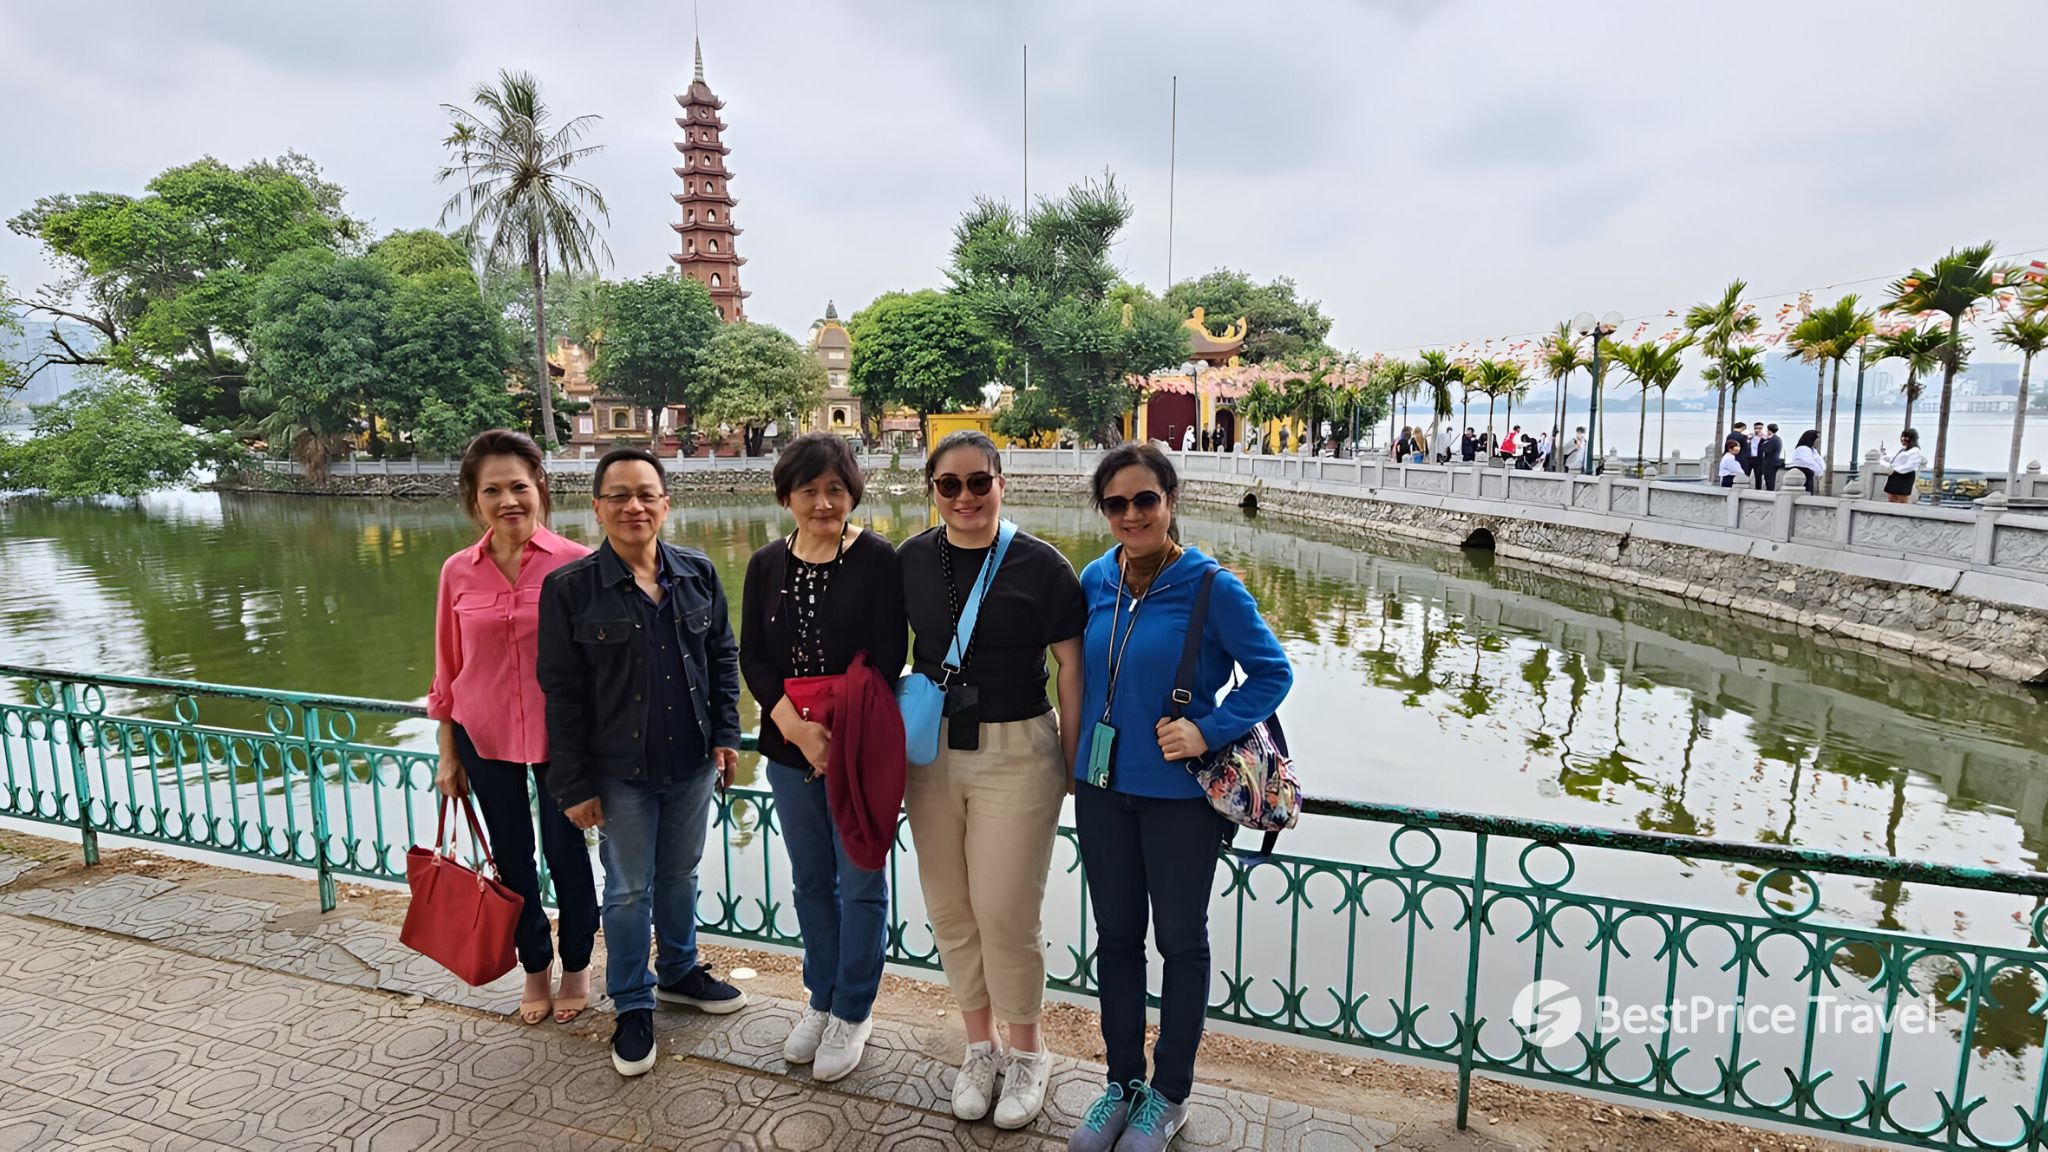 Day 2 Tran Quoc Pagoda Stands Out As One Of The Prominent Attractions In Hanoi